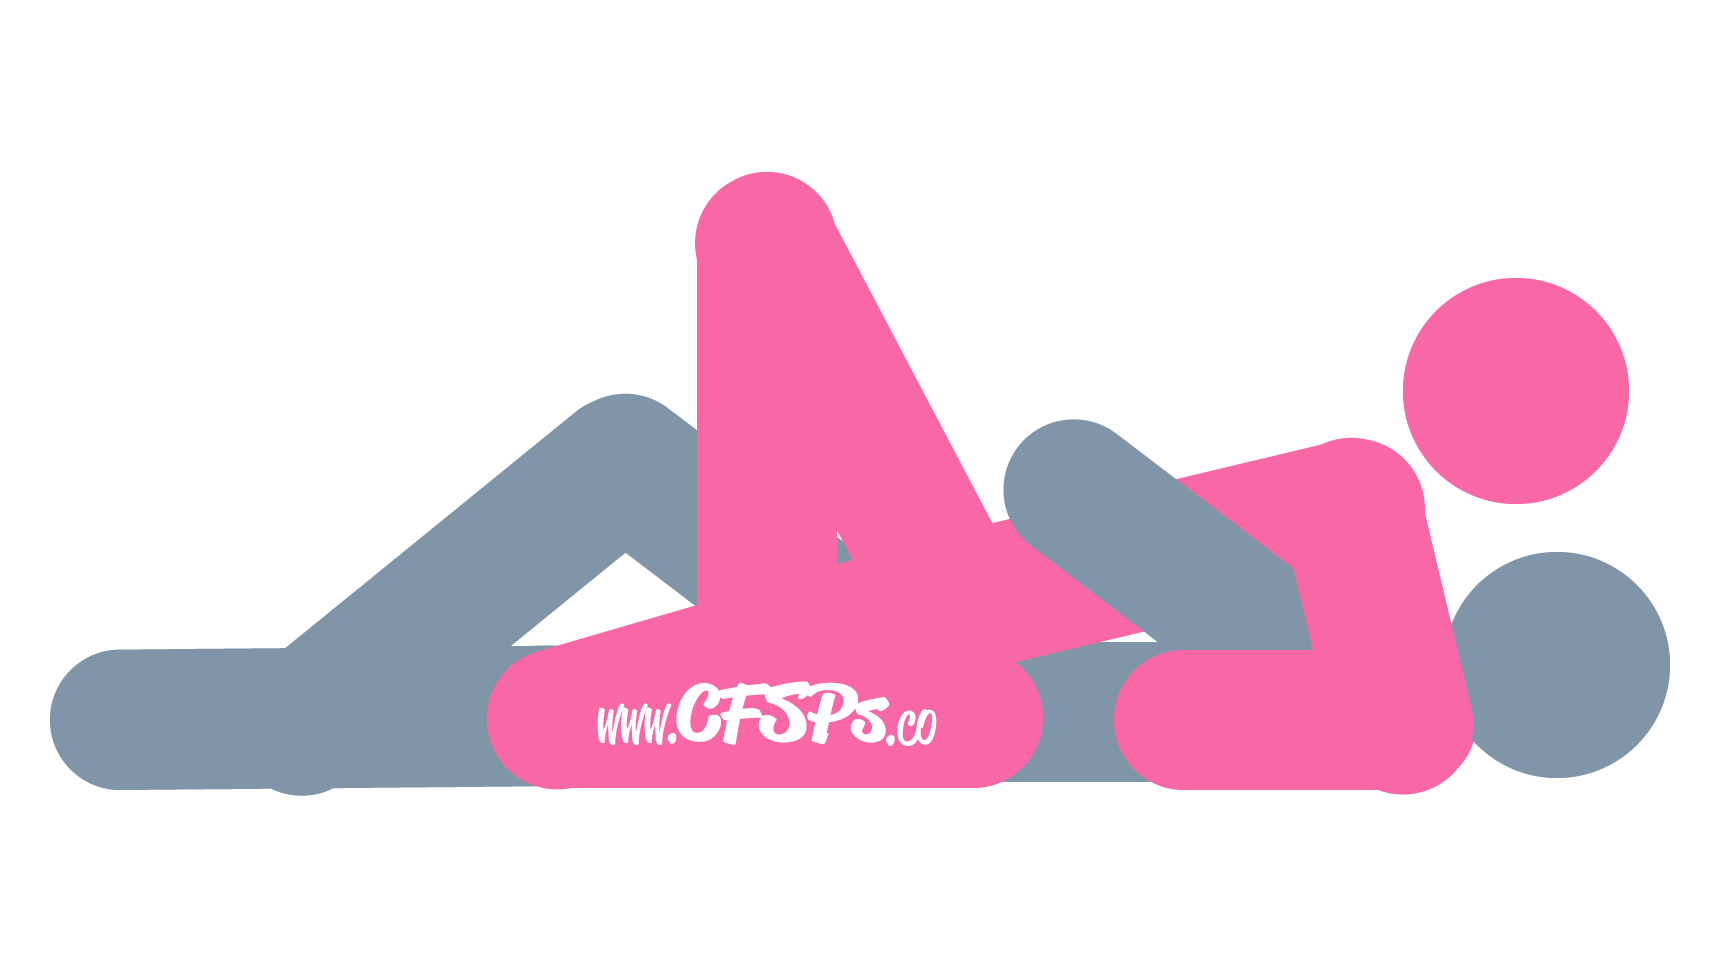 An illustration of the Stargazer sex position. This picture demonstrates how Stargazer is a rear-entry, woman-on-top sex position with great g-spot stimulation.